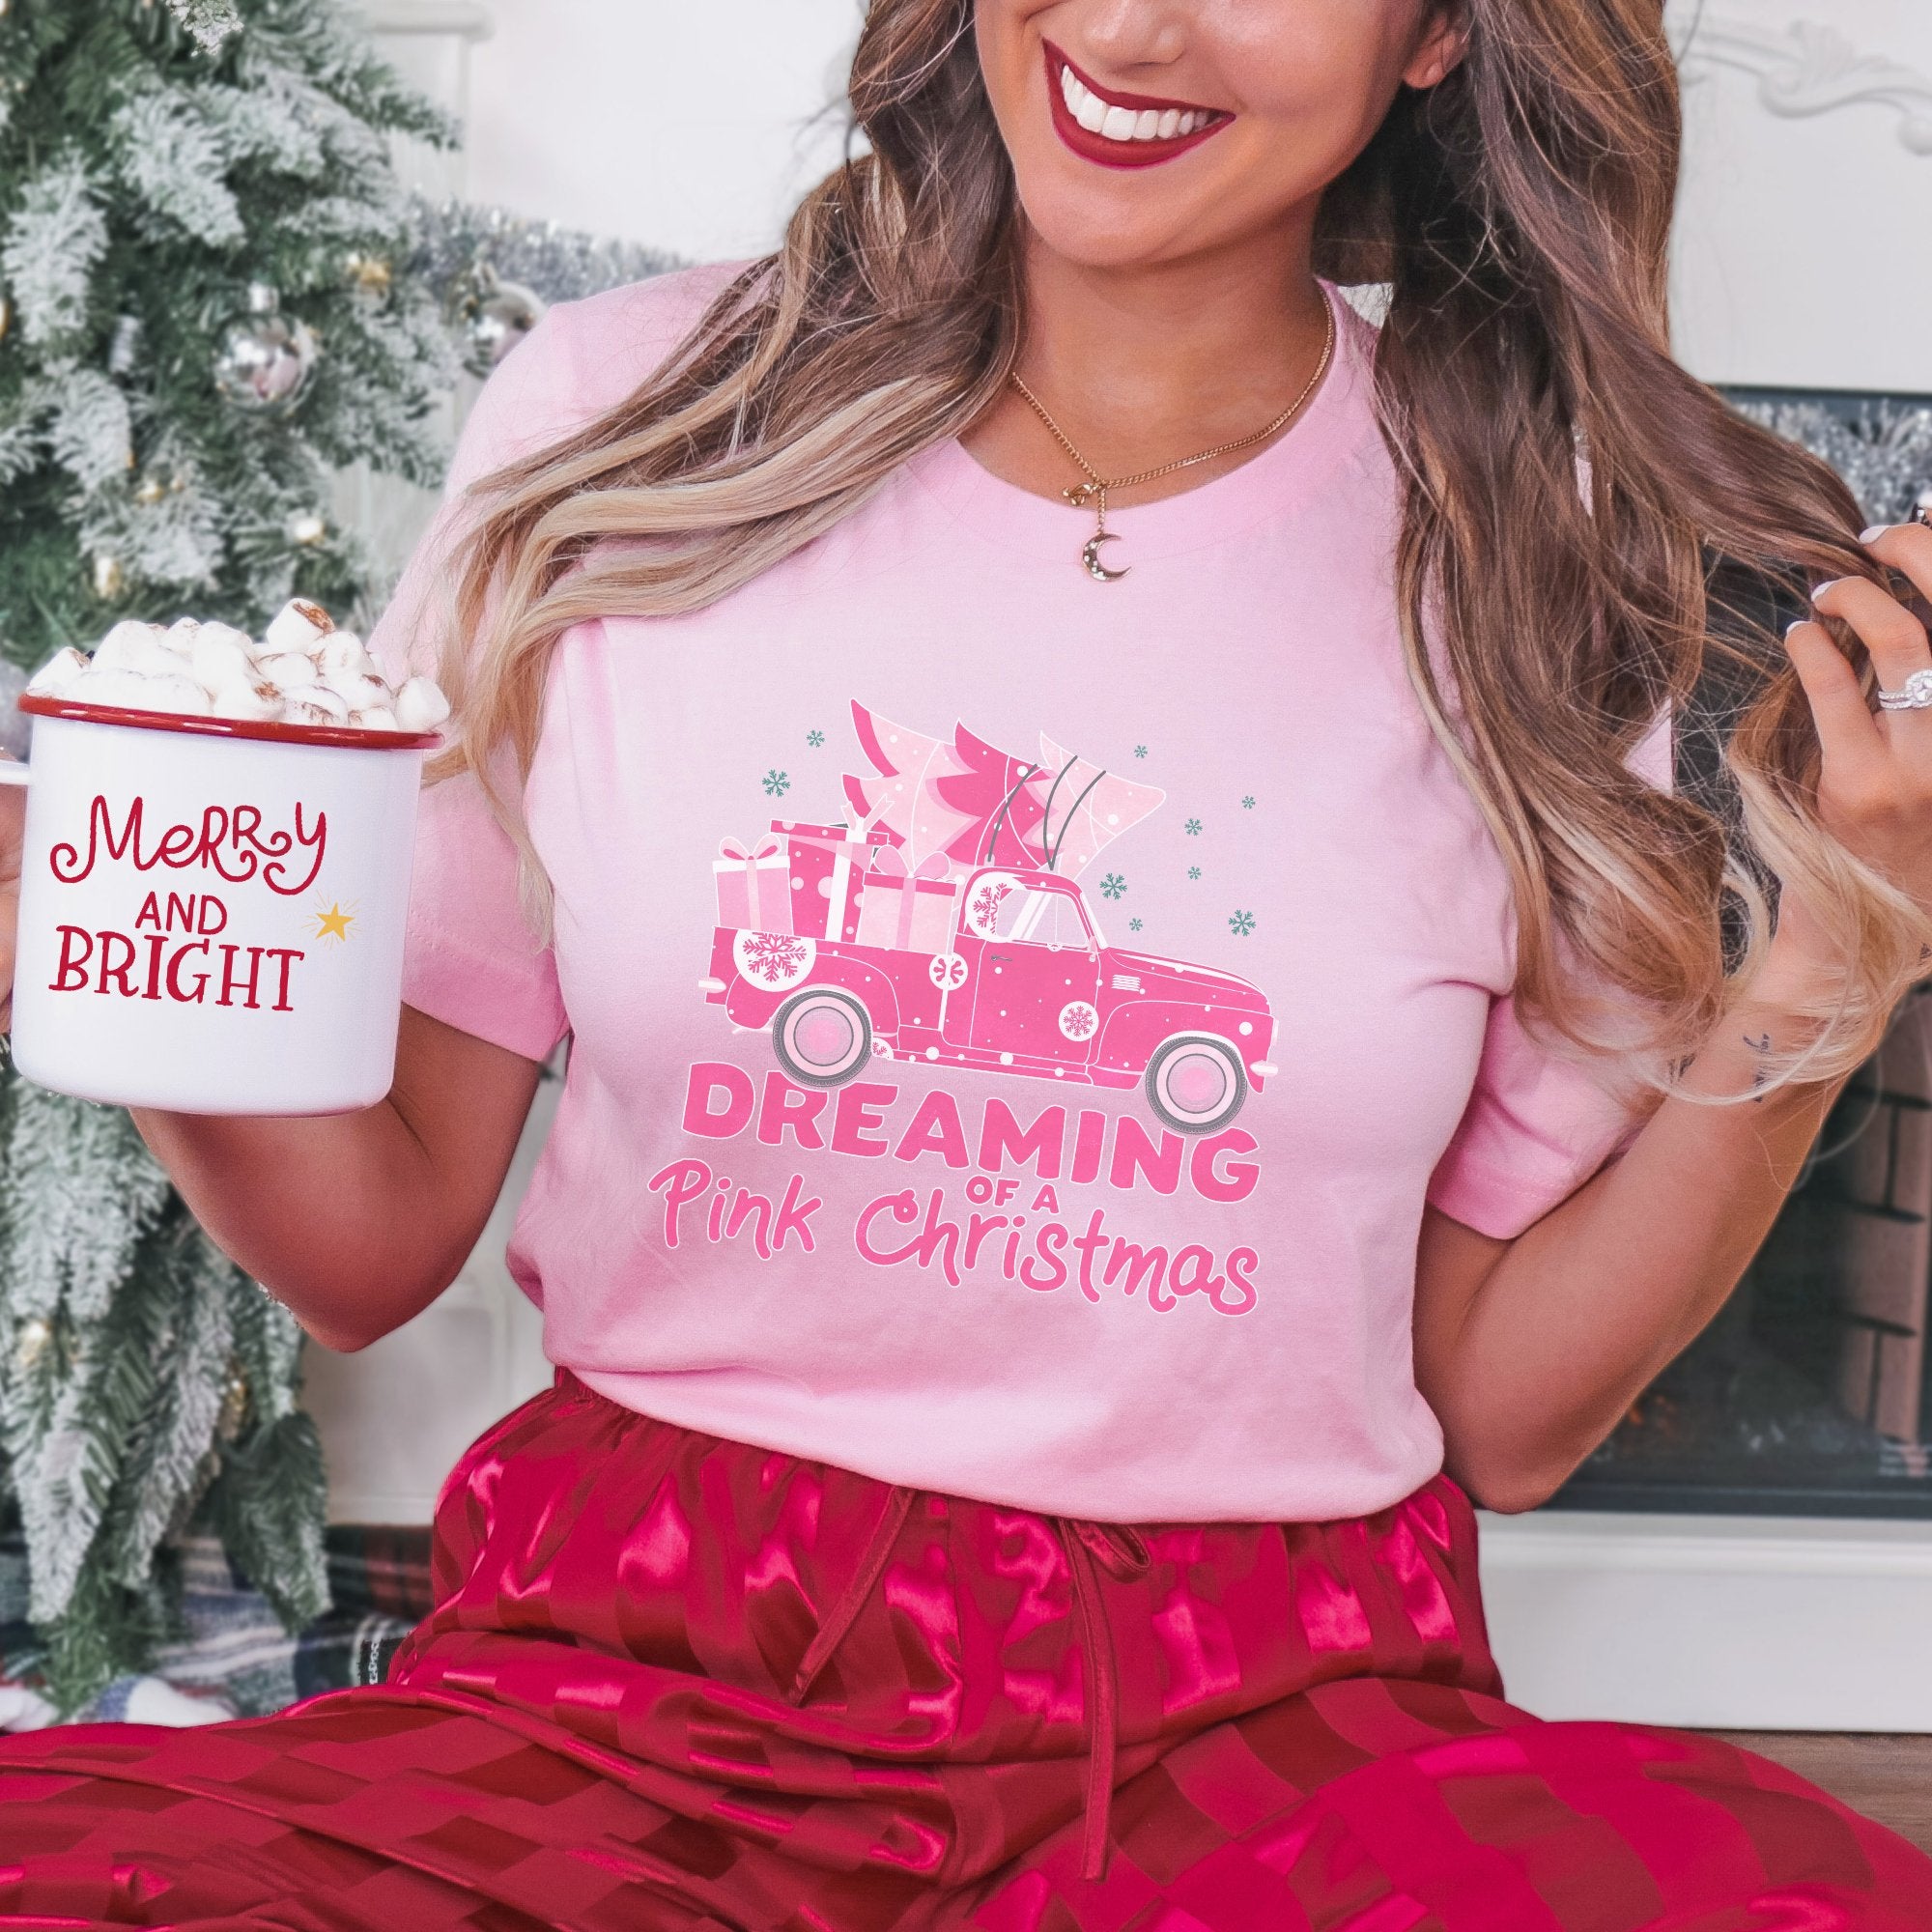 Dreaming of a Pink Christmas Truck Christmas T-shirt - Trendznmore